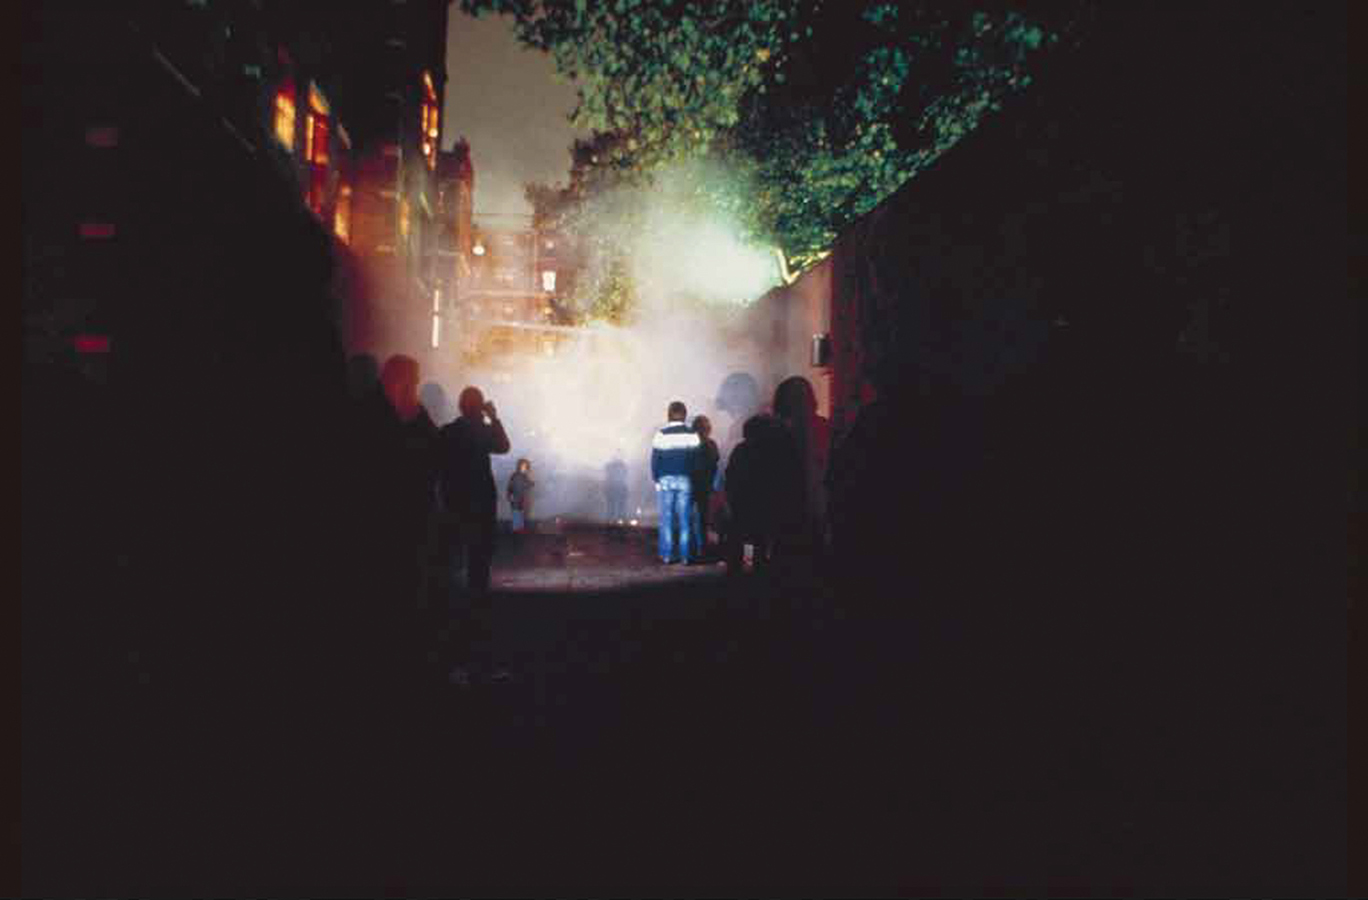 Image of people standing in a smokey alleyway